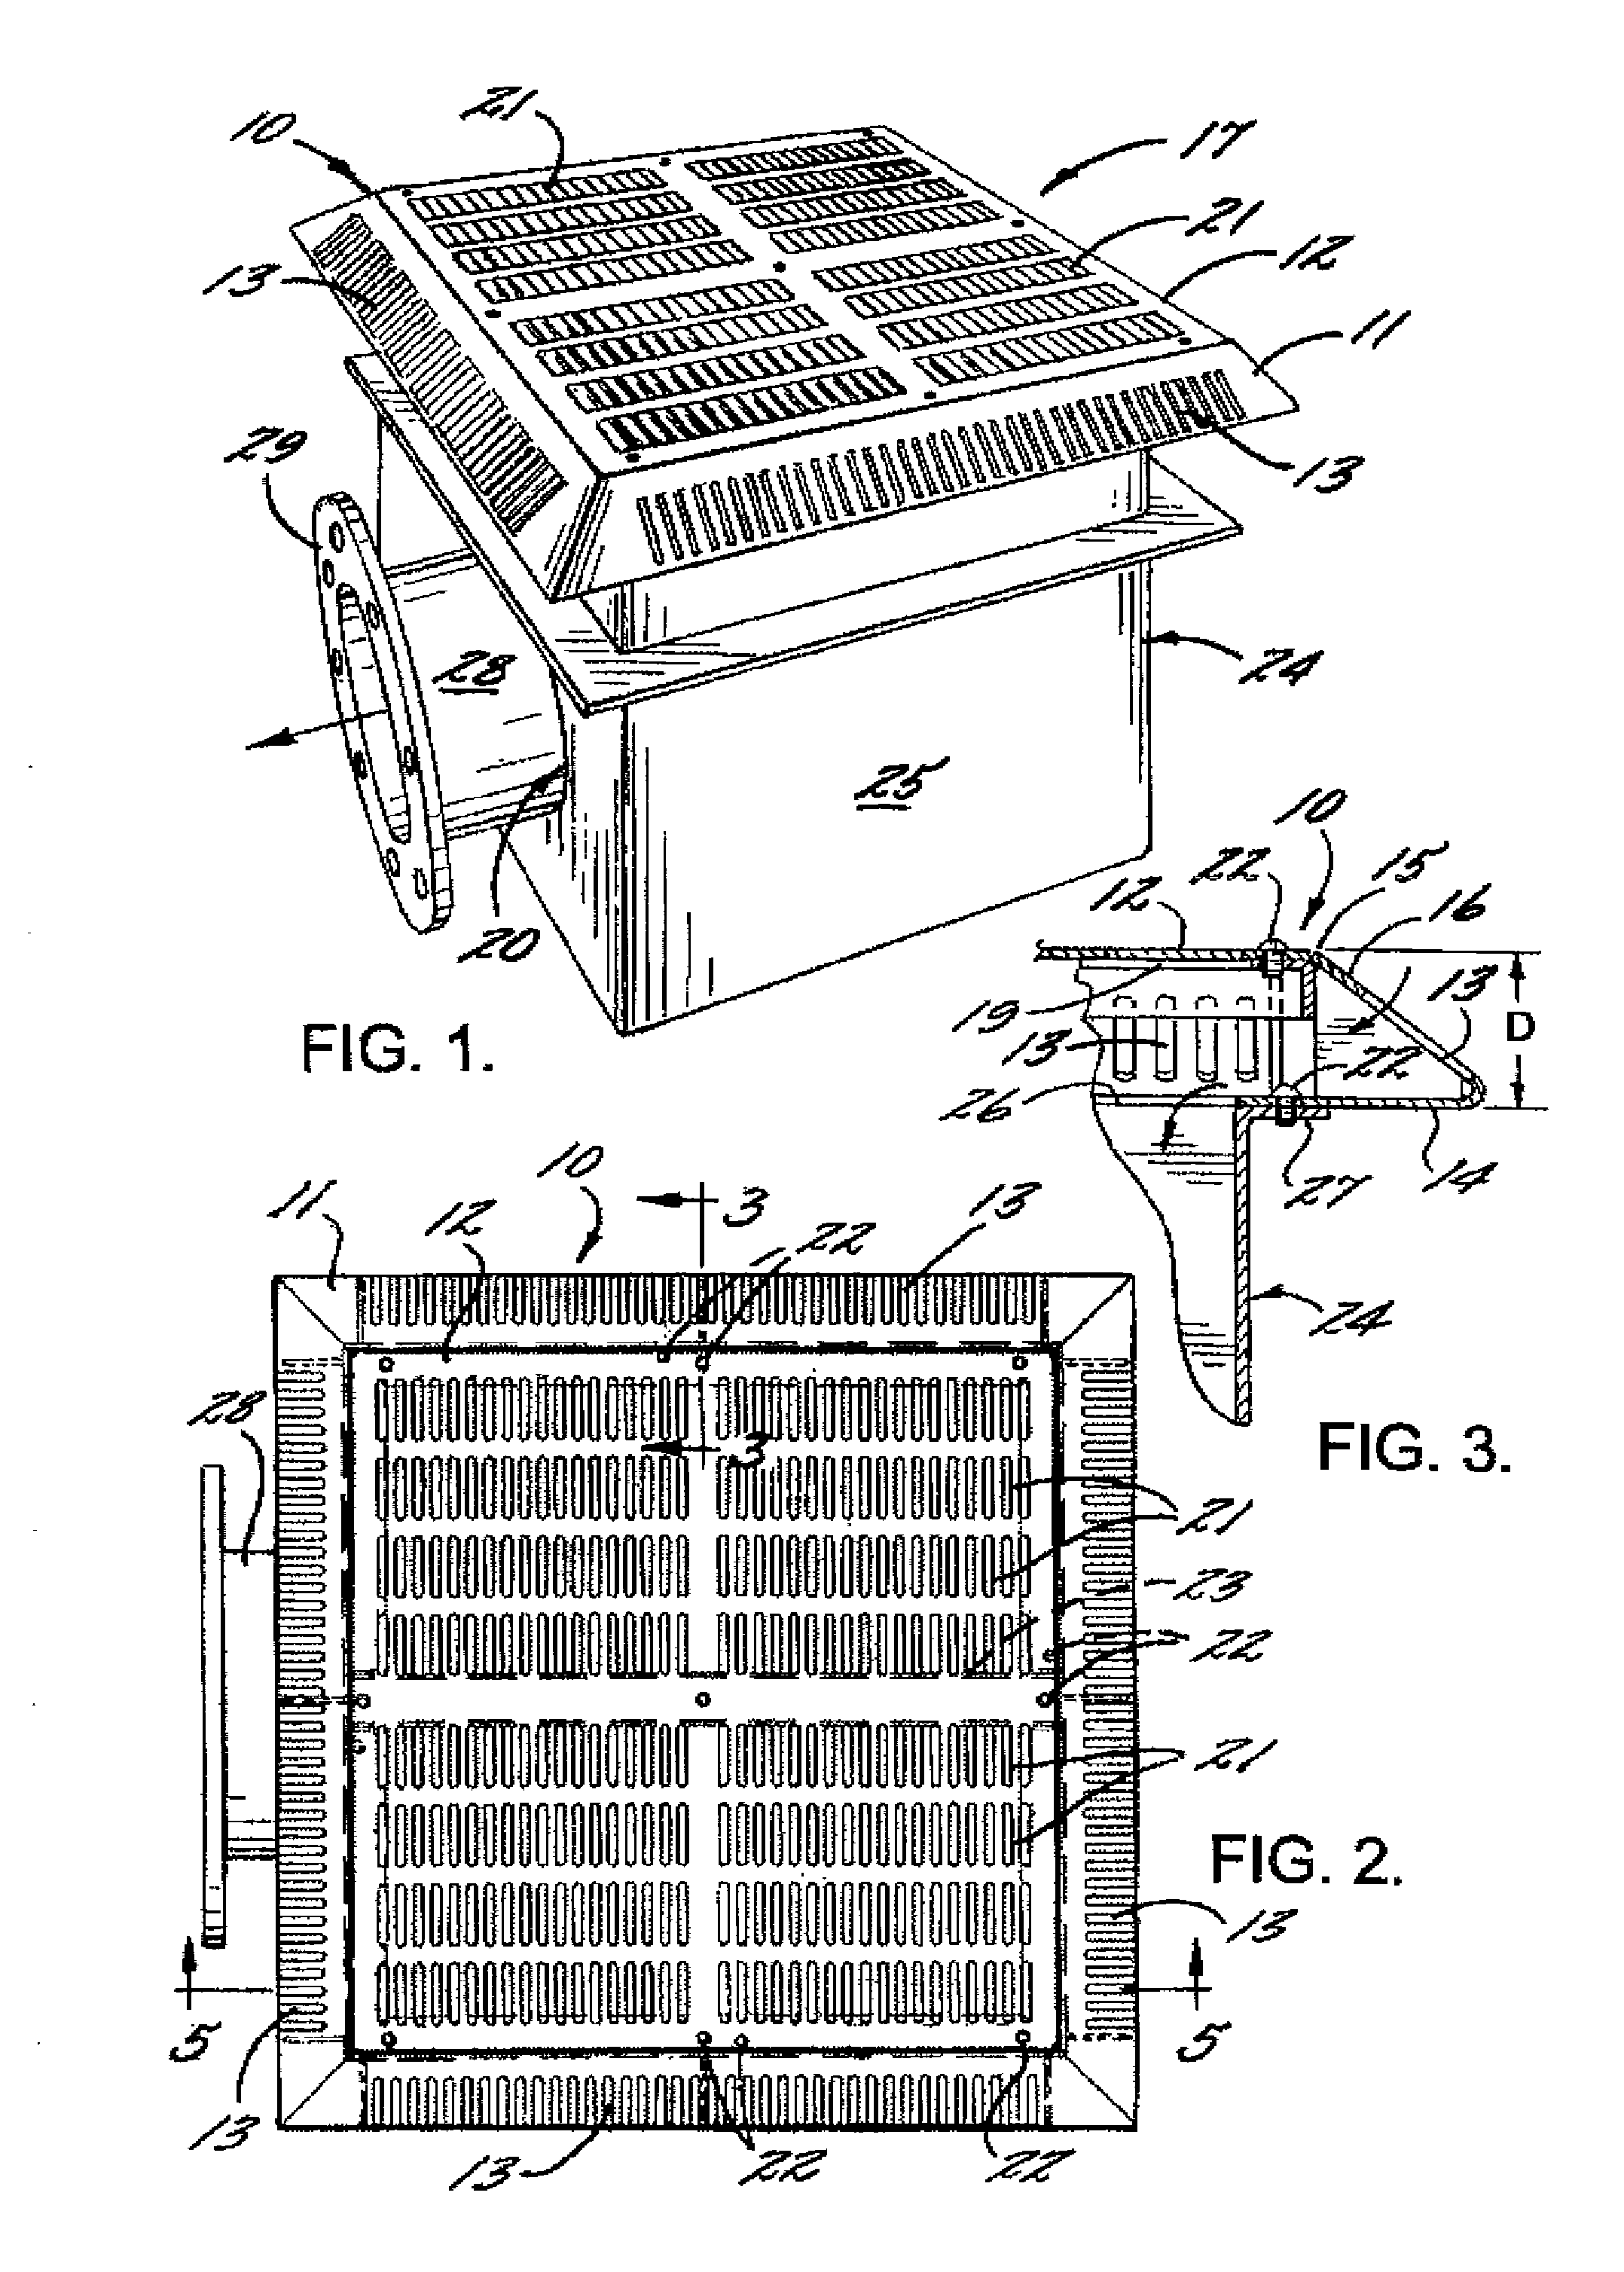 Cover and Sump Assembly For Preventing Suction Entrapment